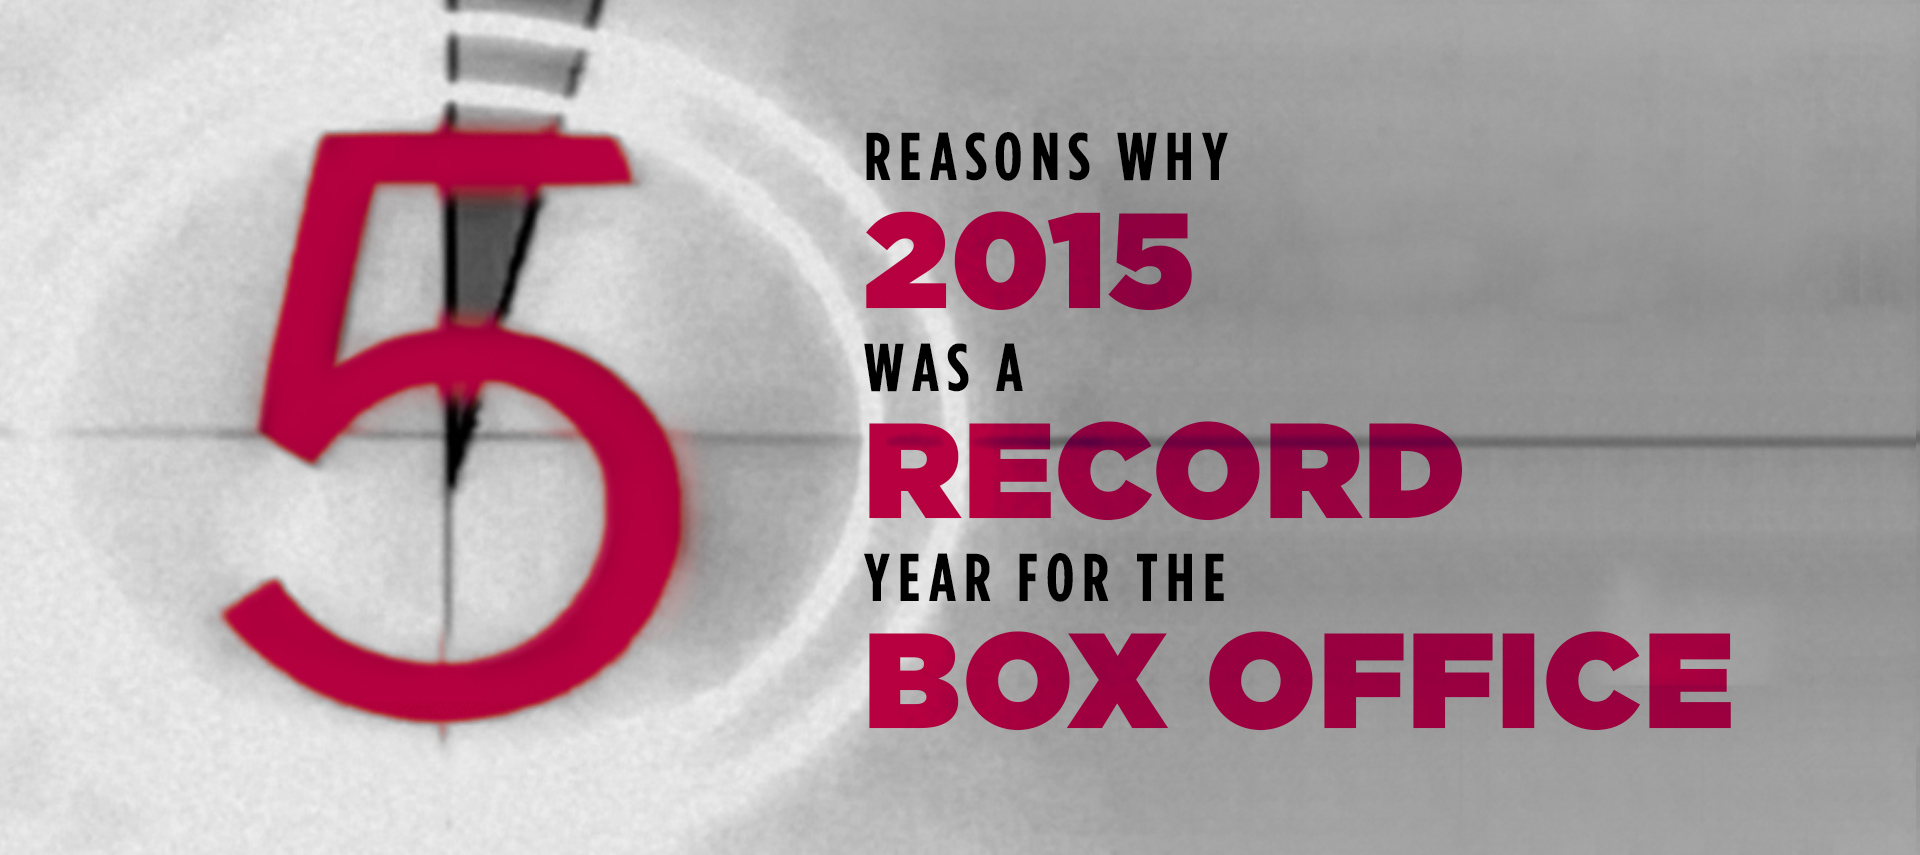 5 reasons why 2015 was a record year for box office